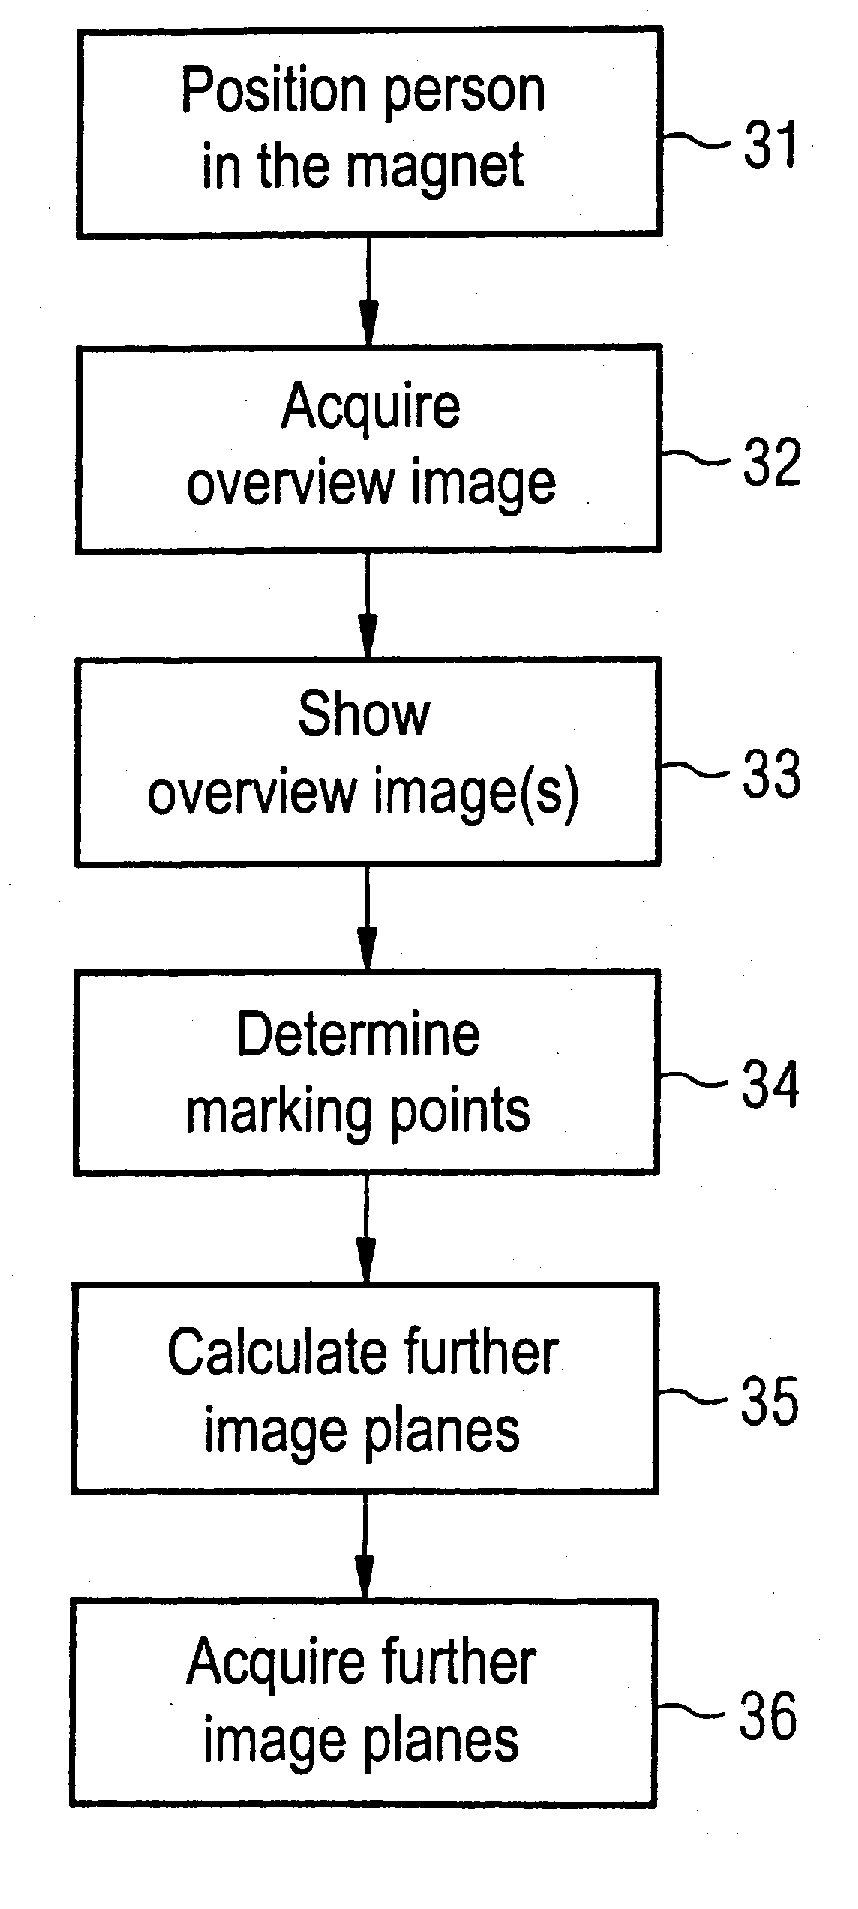 Magnetic resonance system and method for cardiac imaging